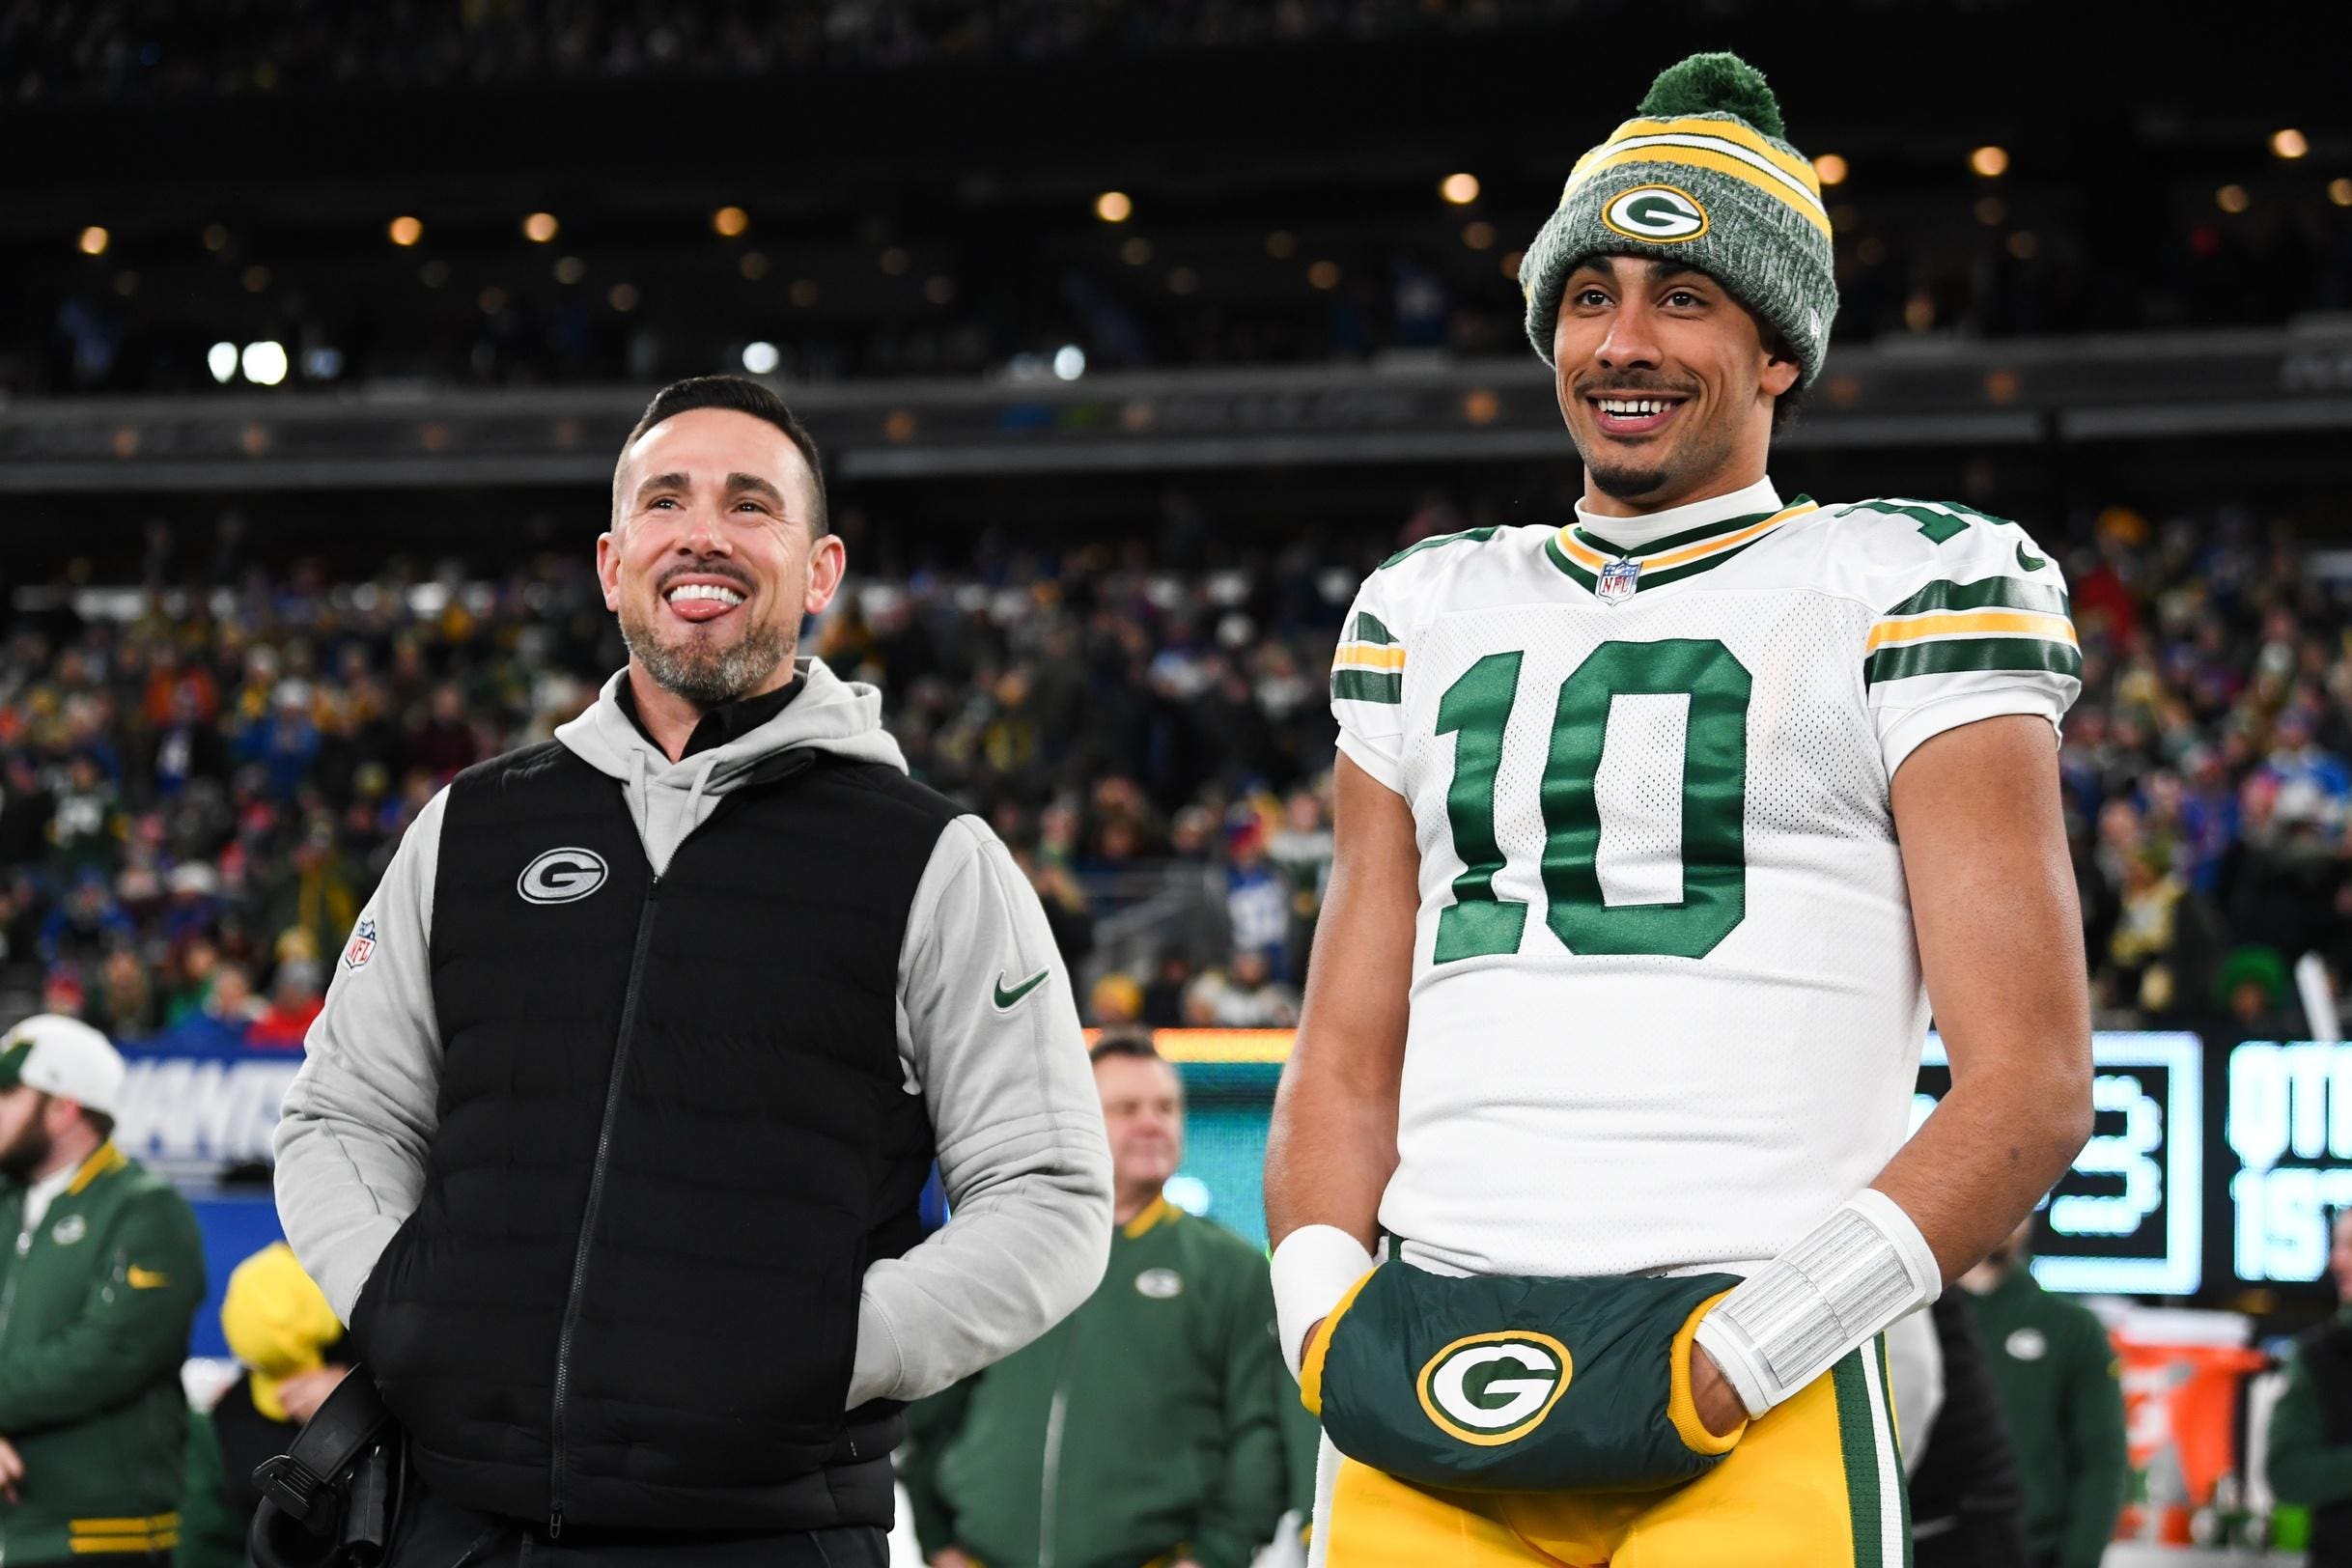 Photo: packers odds to win nfc championship